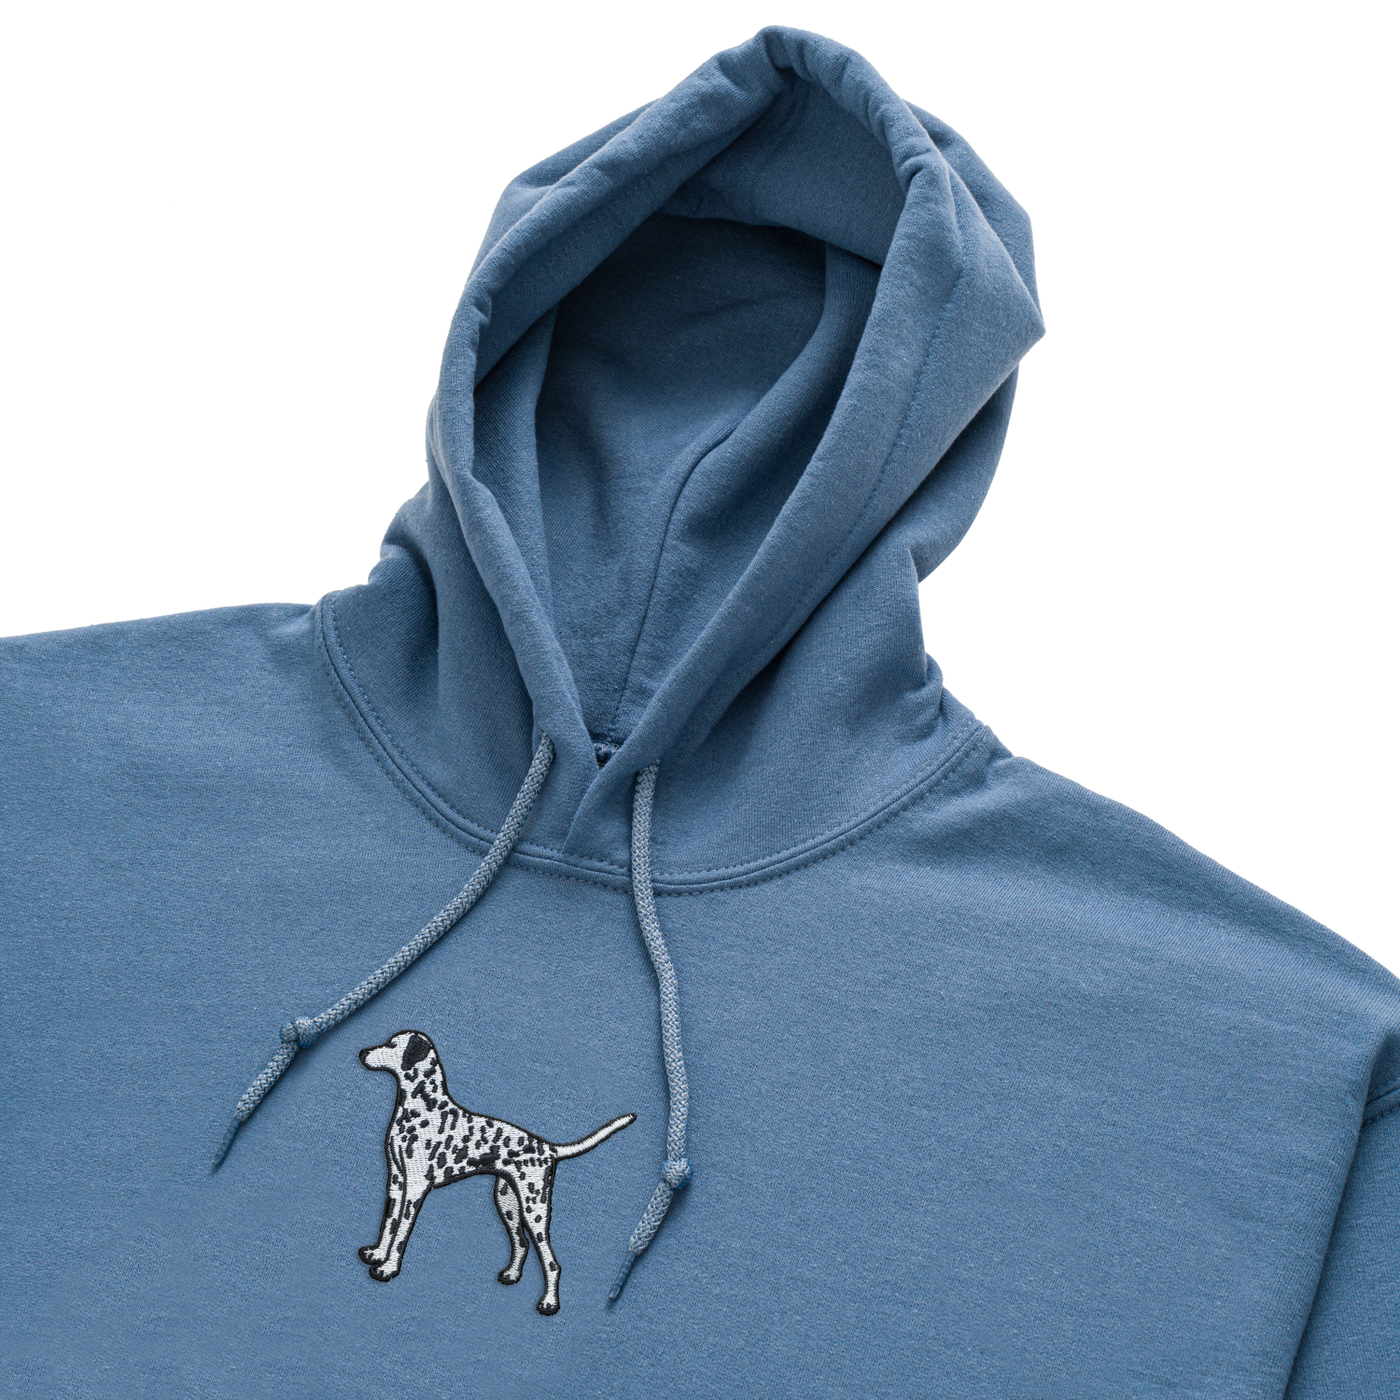 Bobby's Planet Men's Embroidered Dalmatian Hoodie from Paws Dog Cat Animals Collection in Indigo Blue Color#color_indigo-blue